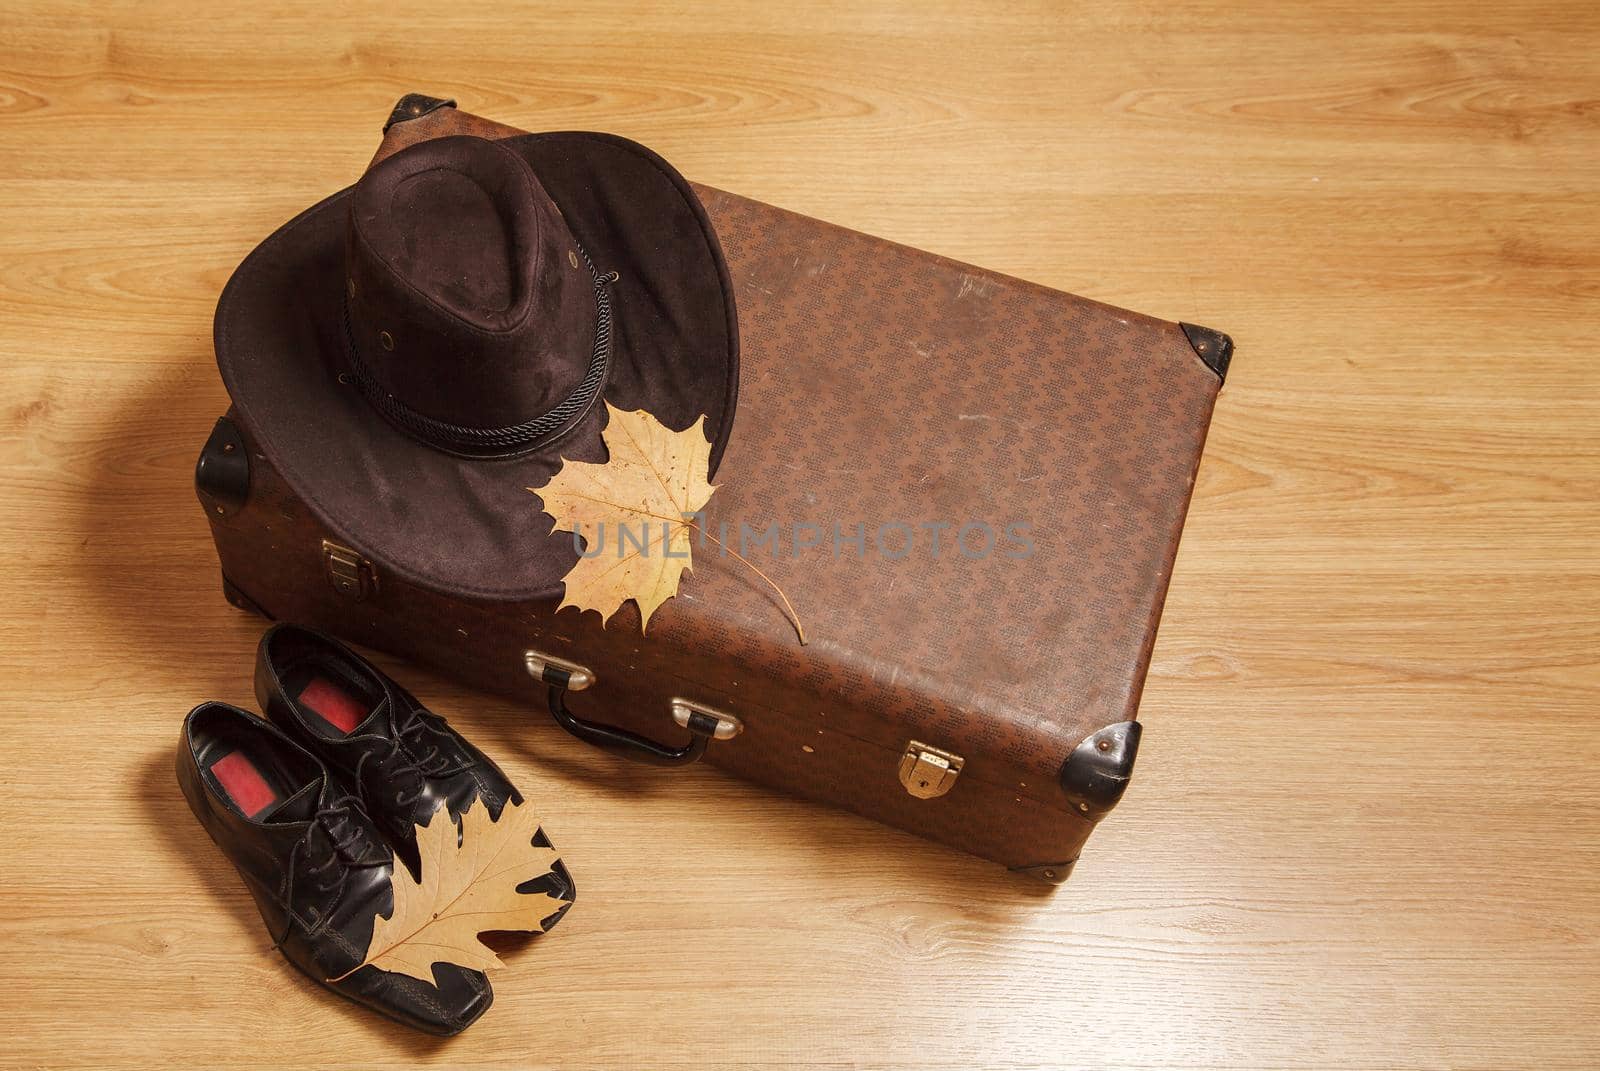 set of men's felt hat with a yellow maple leaves, black shoes and a suitcase on a wooden floor